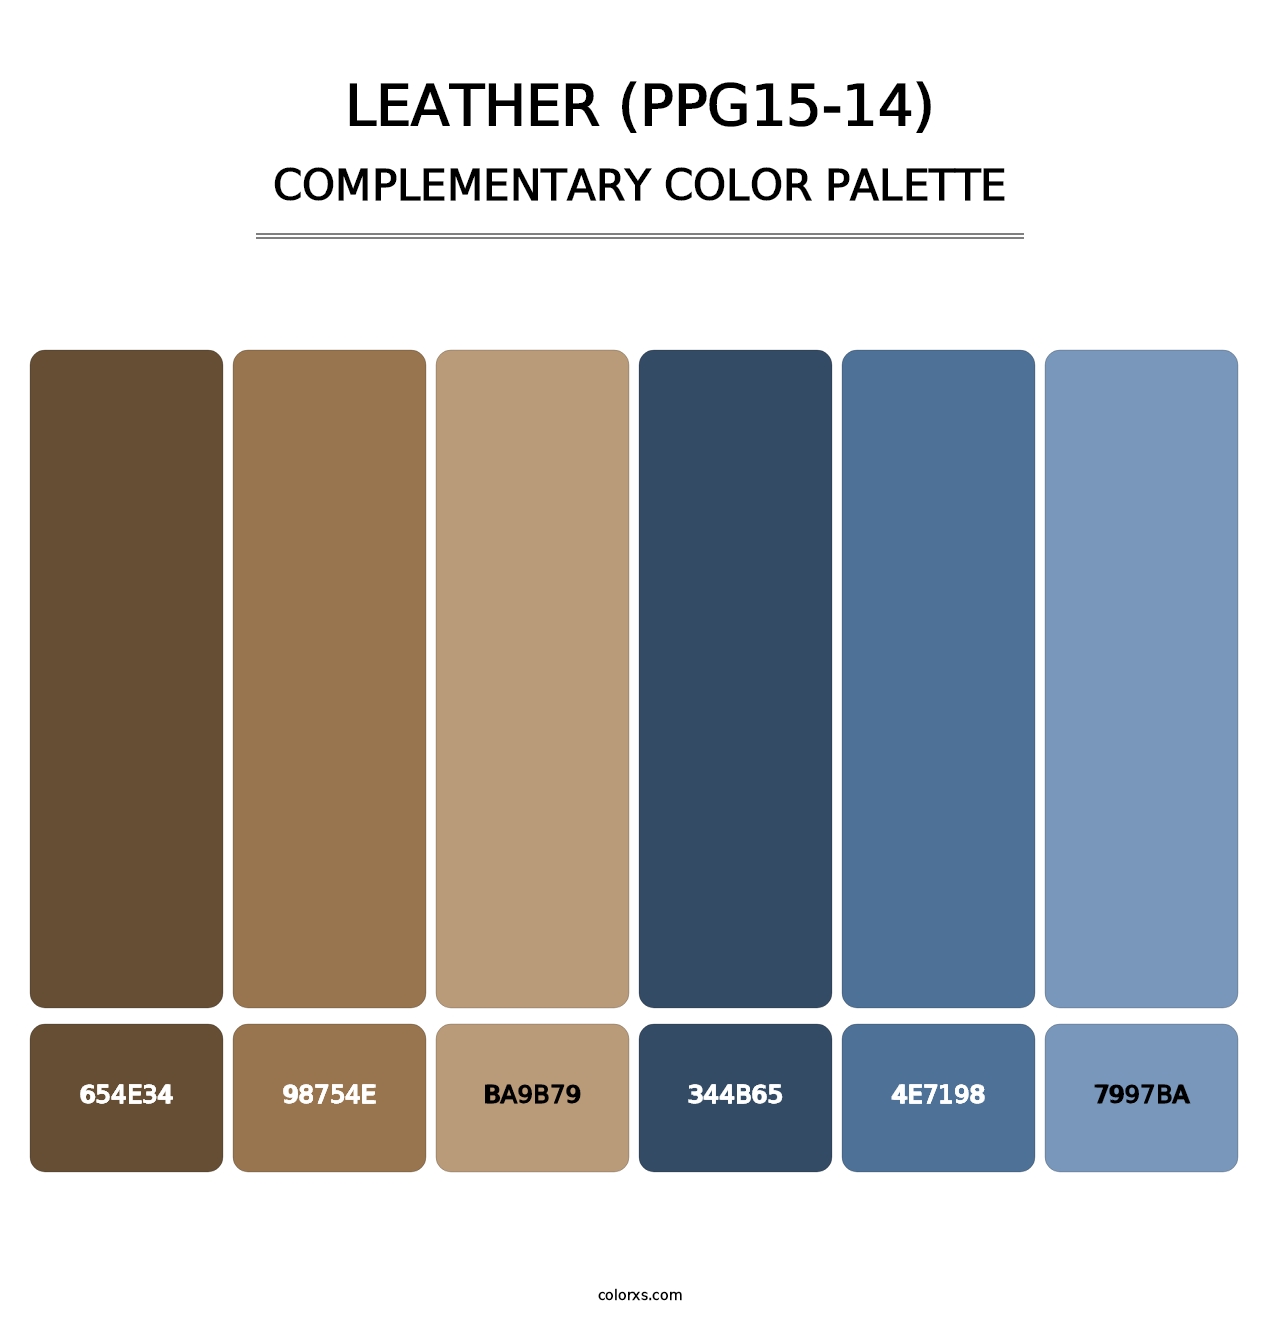 Leather (PPG15-14) - Complementary Color Palette